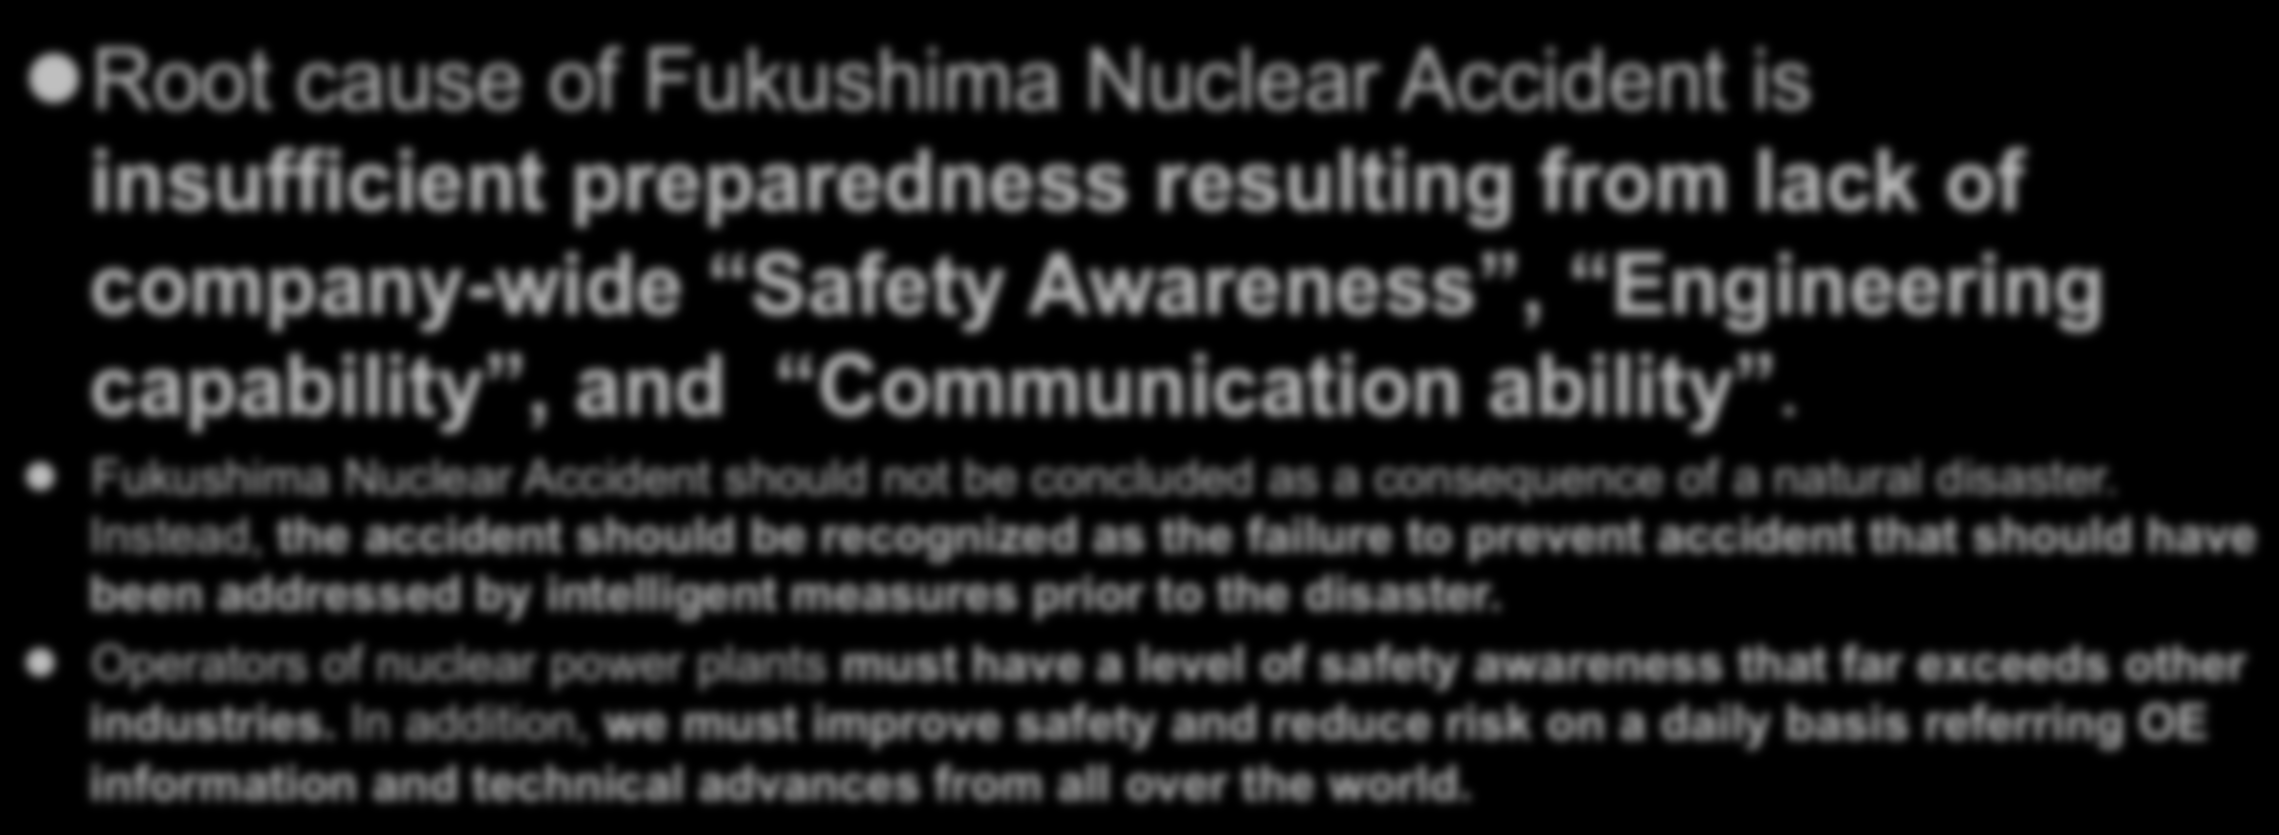 Lessons learned from the Fukushima Nuclear Accident Root Cause Analysis l Insufficient attention to external events (earthquakes and tsunamis) which can cause SBO as a result of common caused failure.